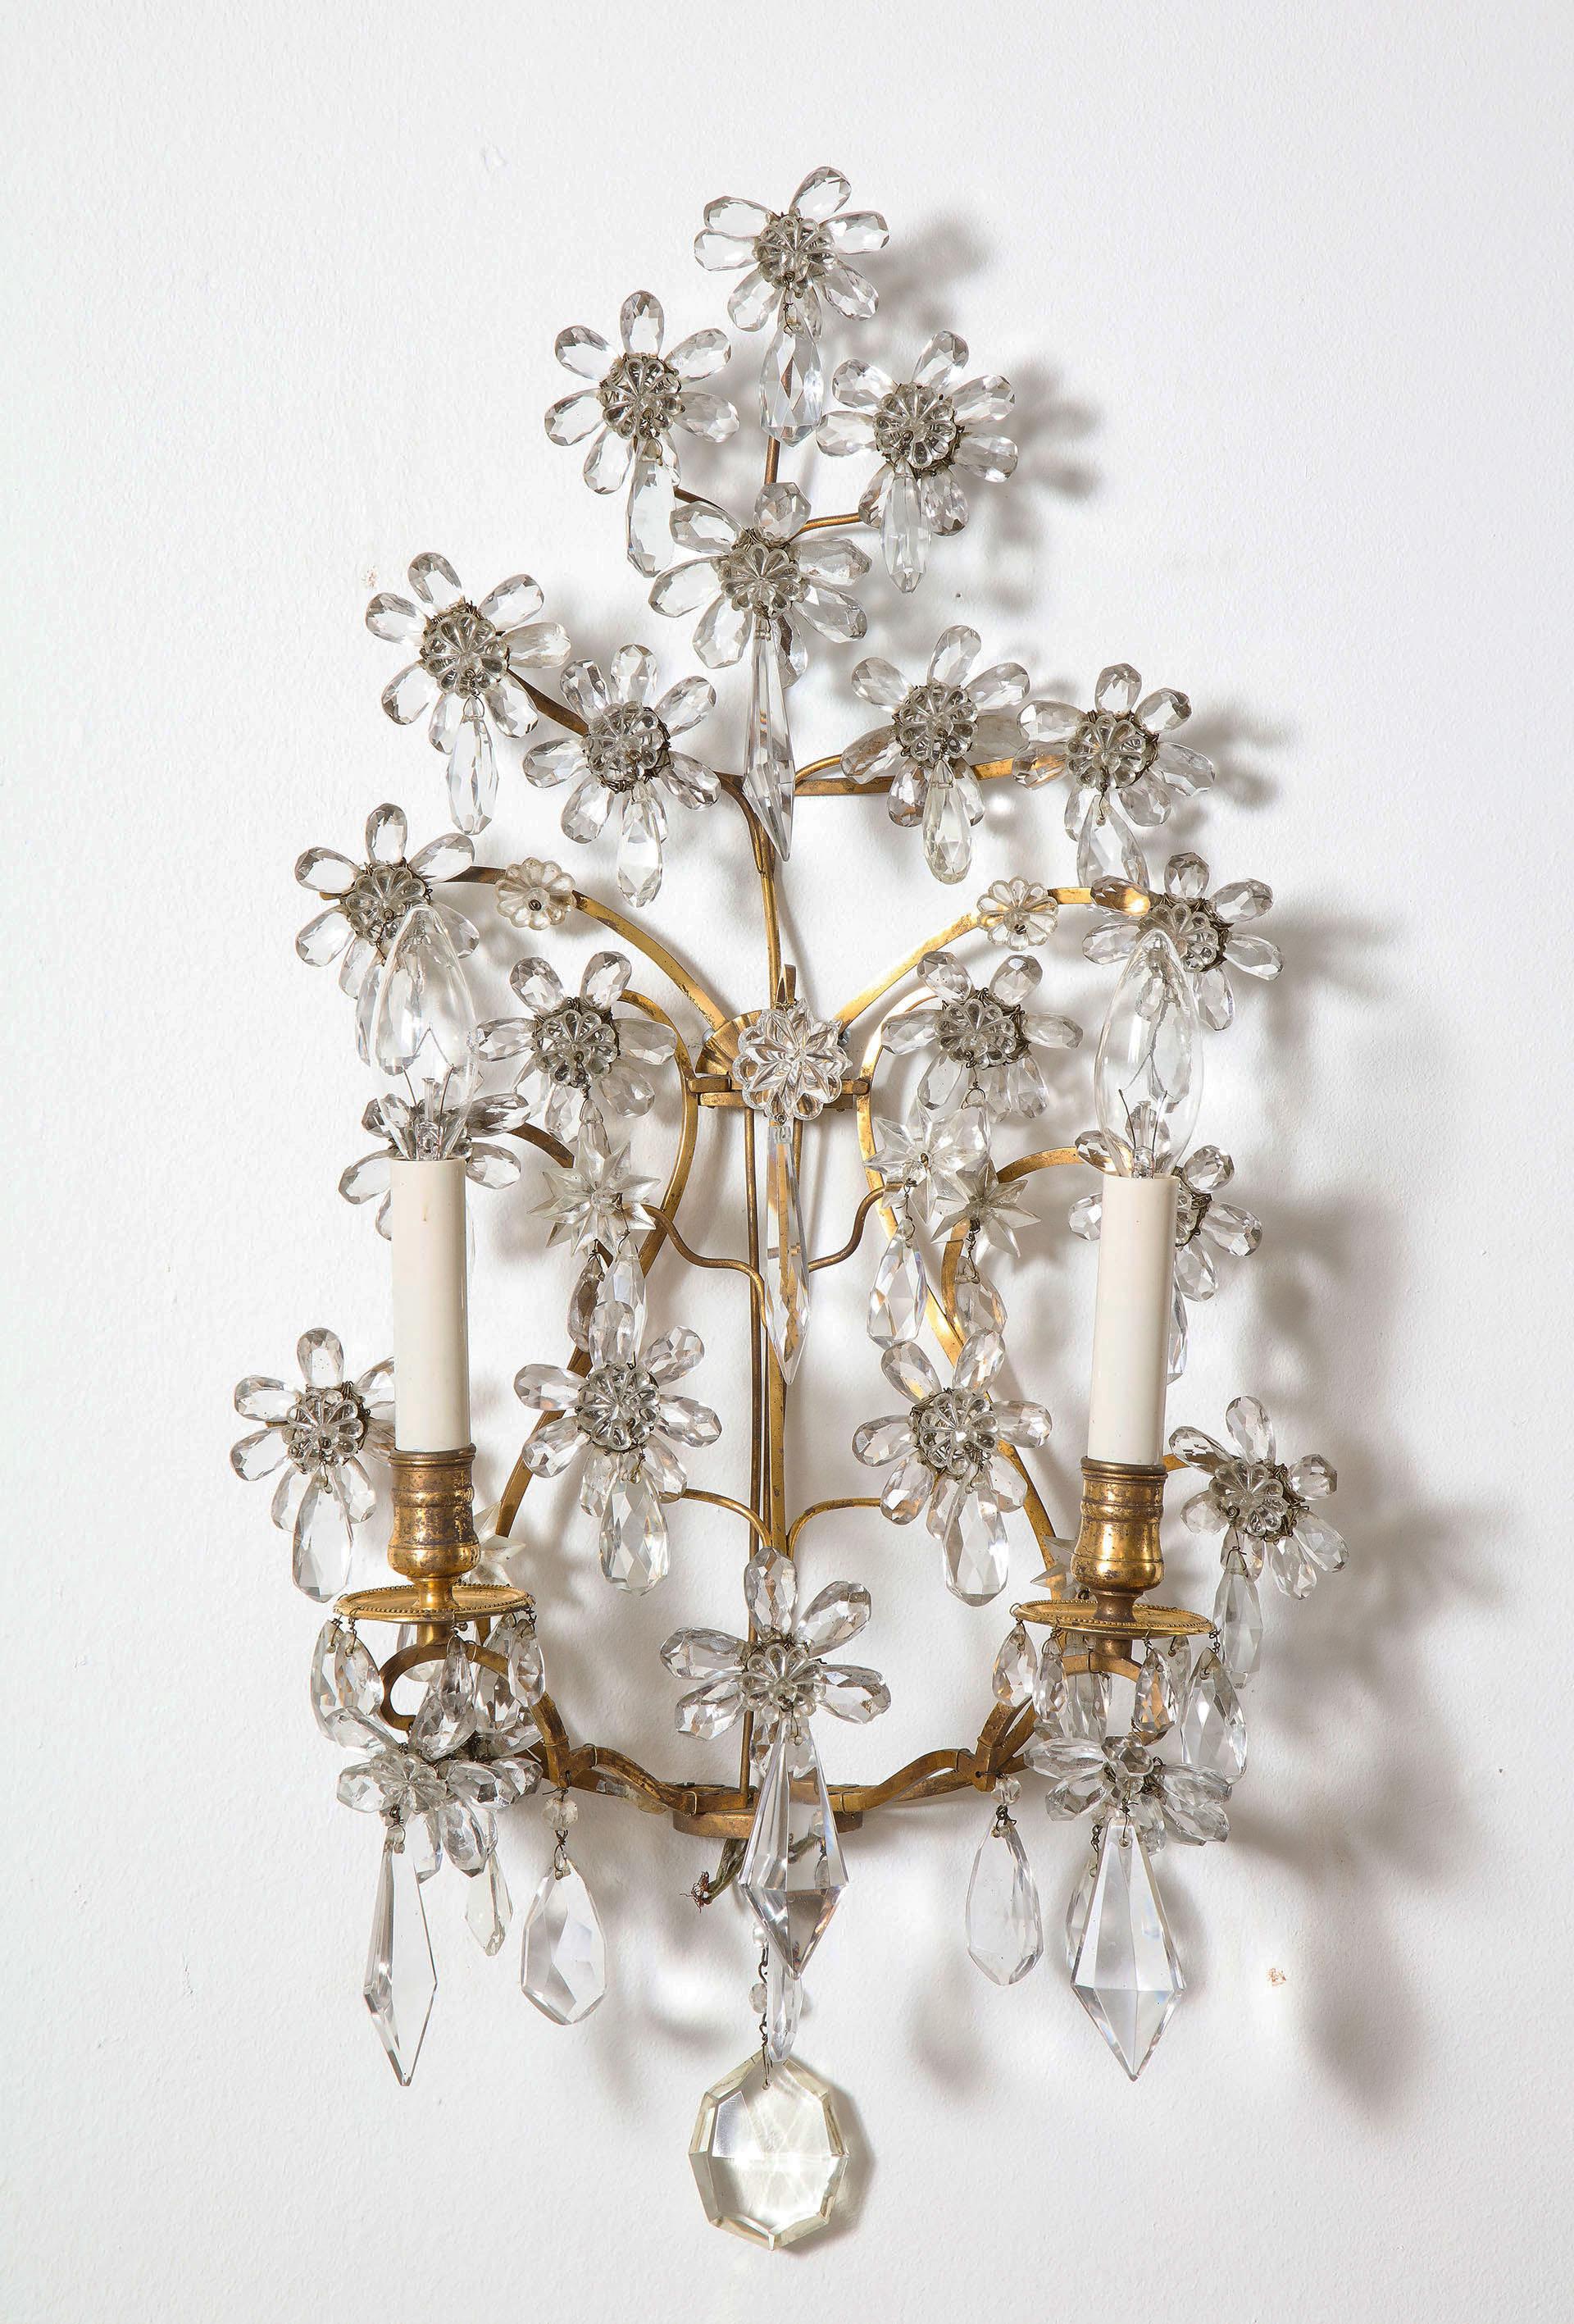 Each with bronze lyre form structure supporting a series of crystal clusters in the form of daisies, with 2 candle lights similarly draped with crystal.